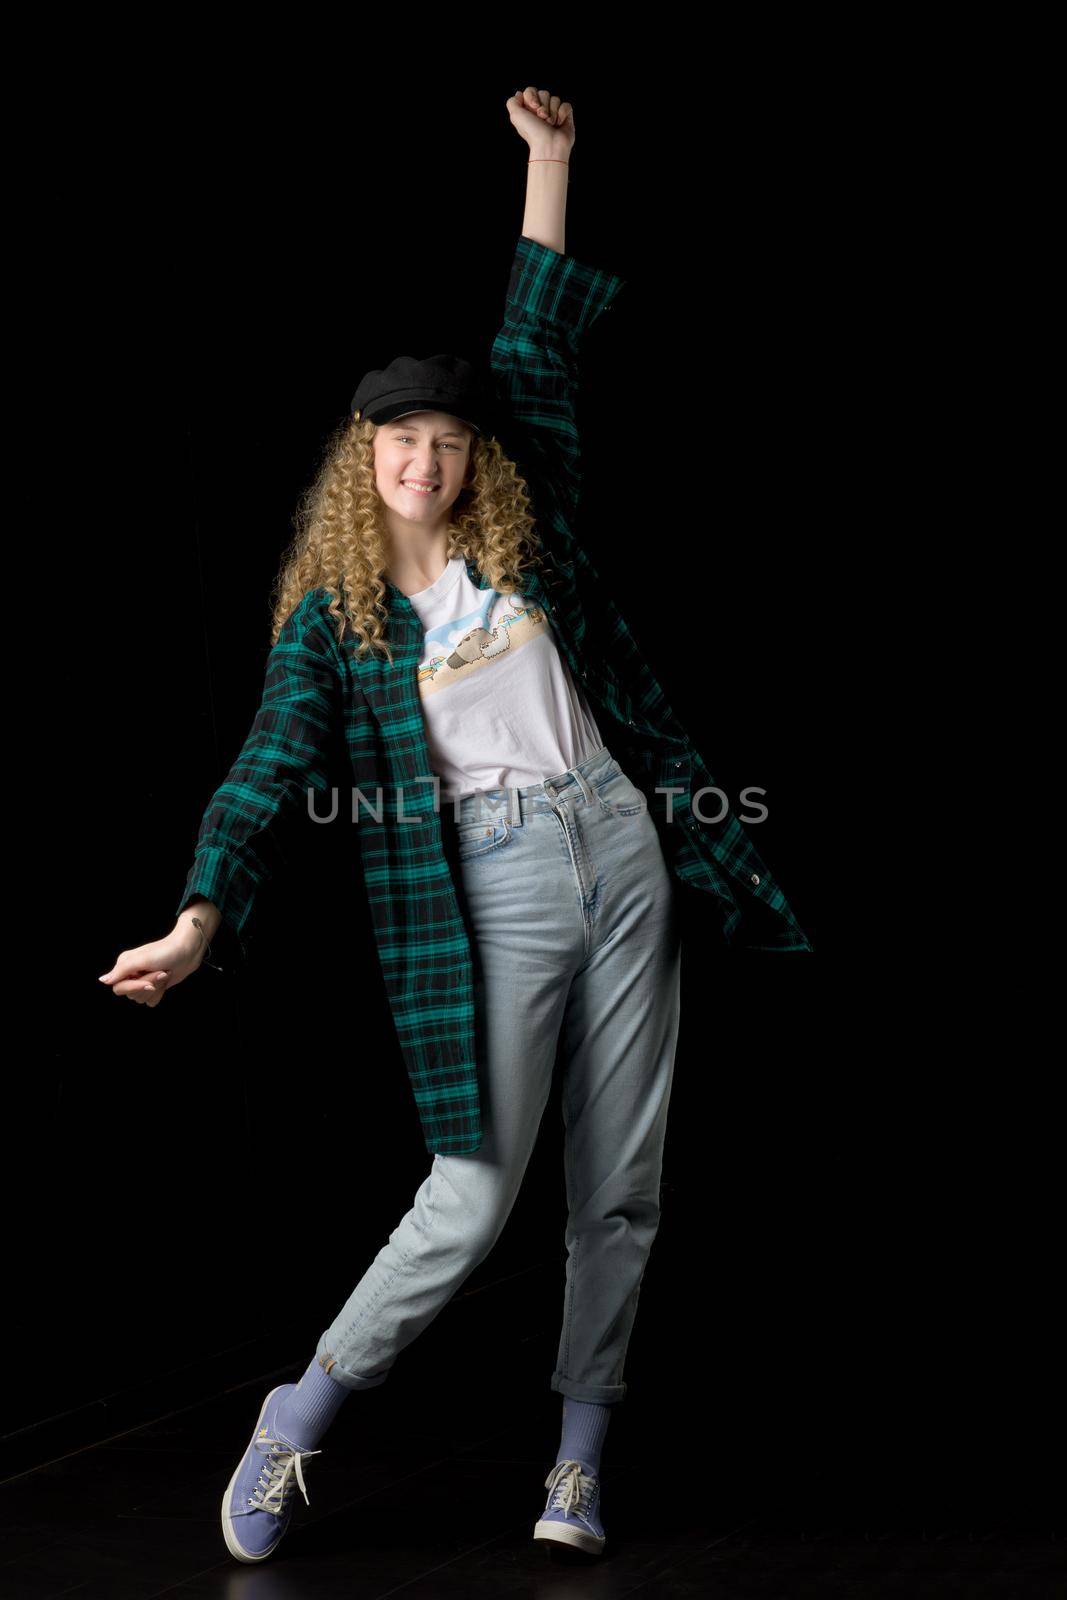 Excited girl raising her fist up in victory sign. Full length shot of happy teenager standing with her arm raised. Girl wearing plaid cotton shirt, cap and jeans posing on black background